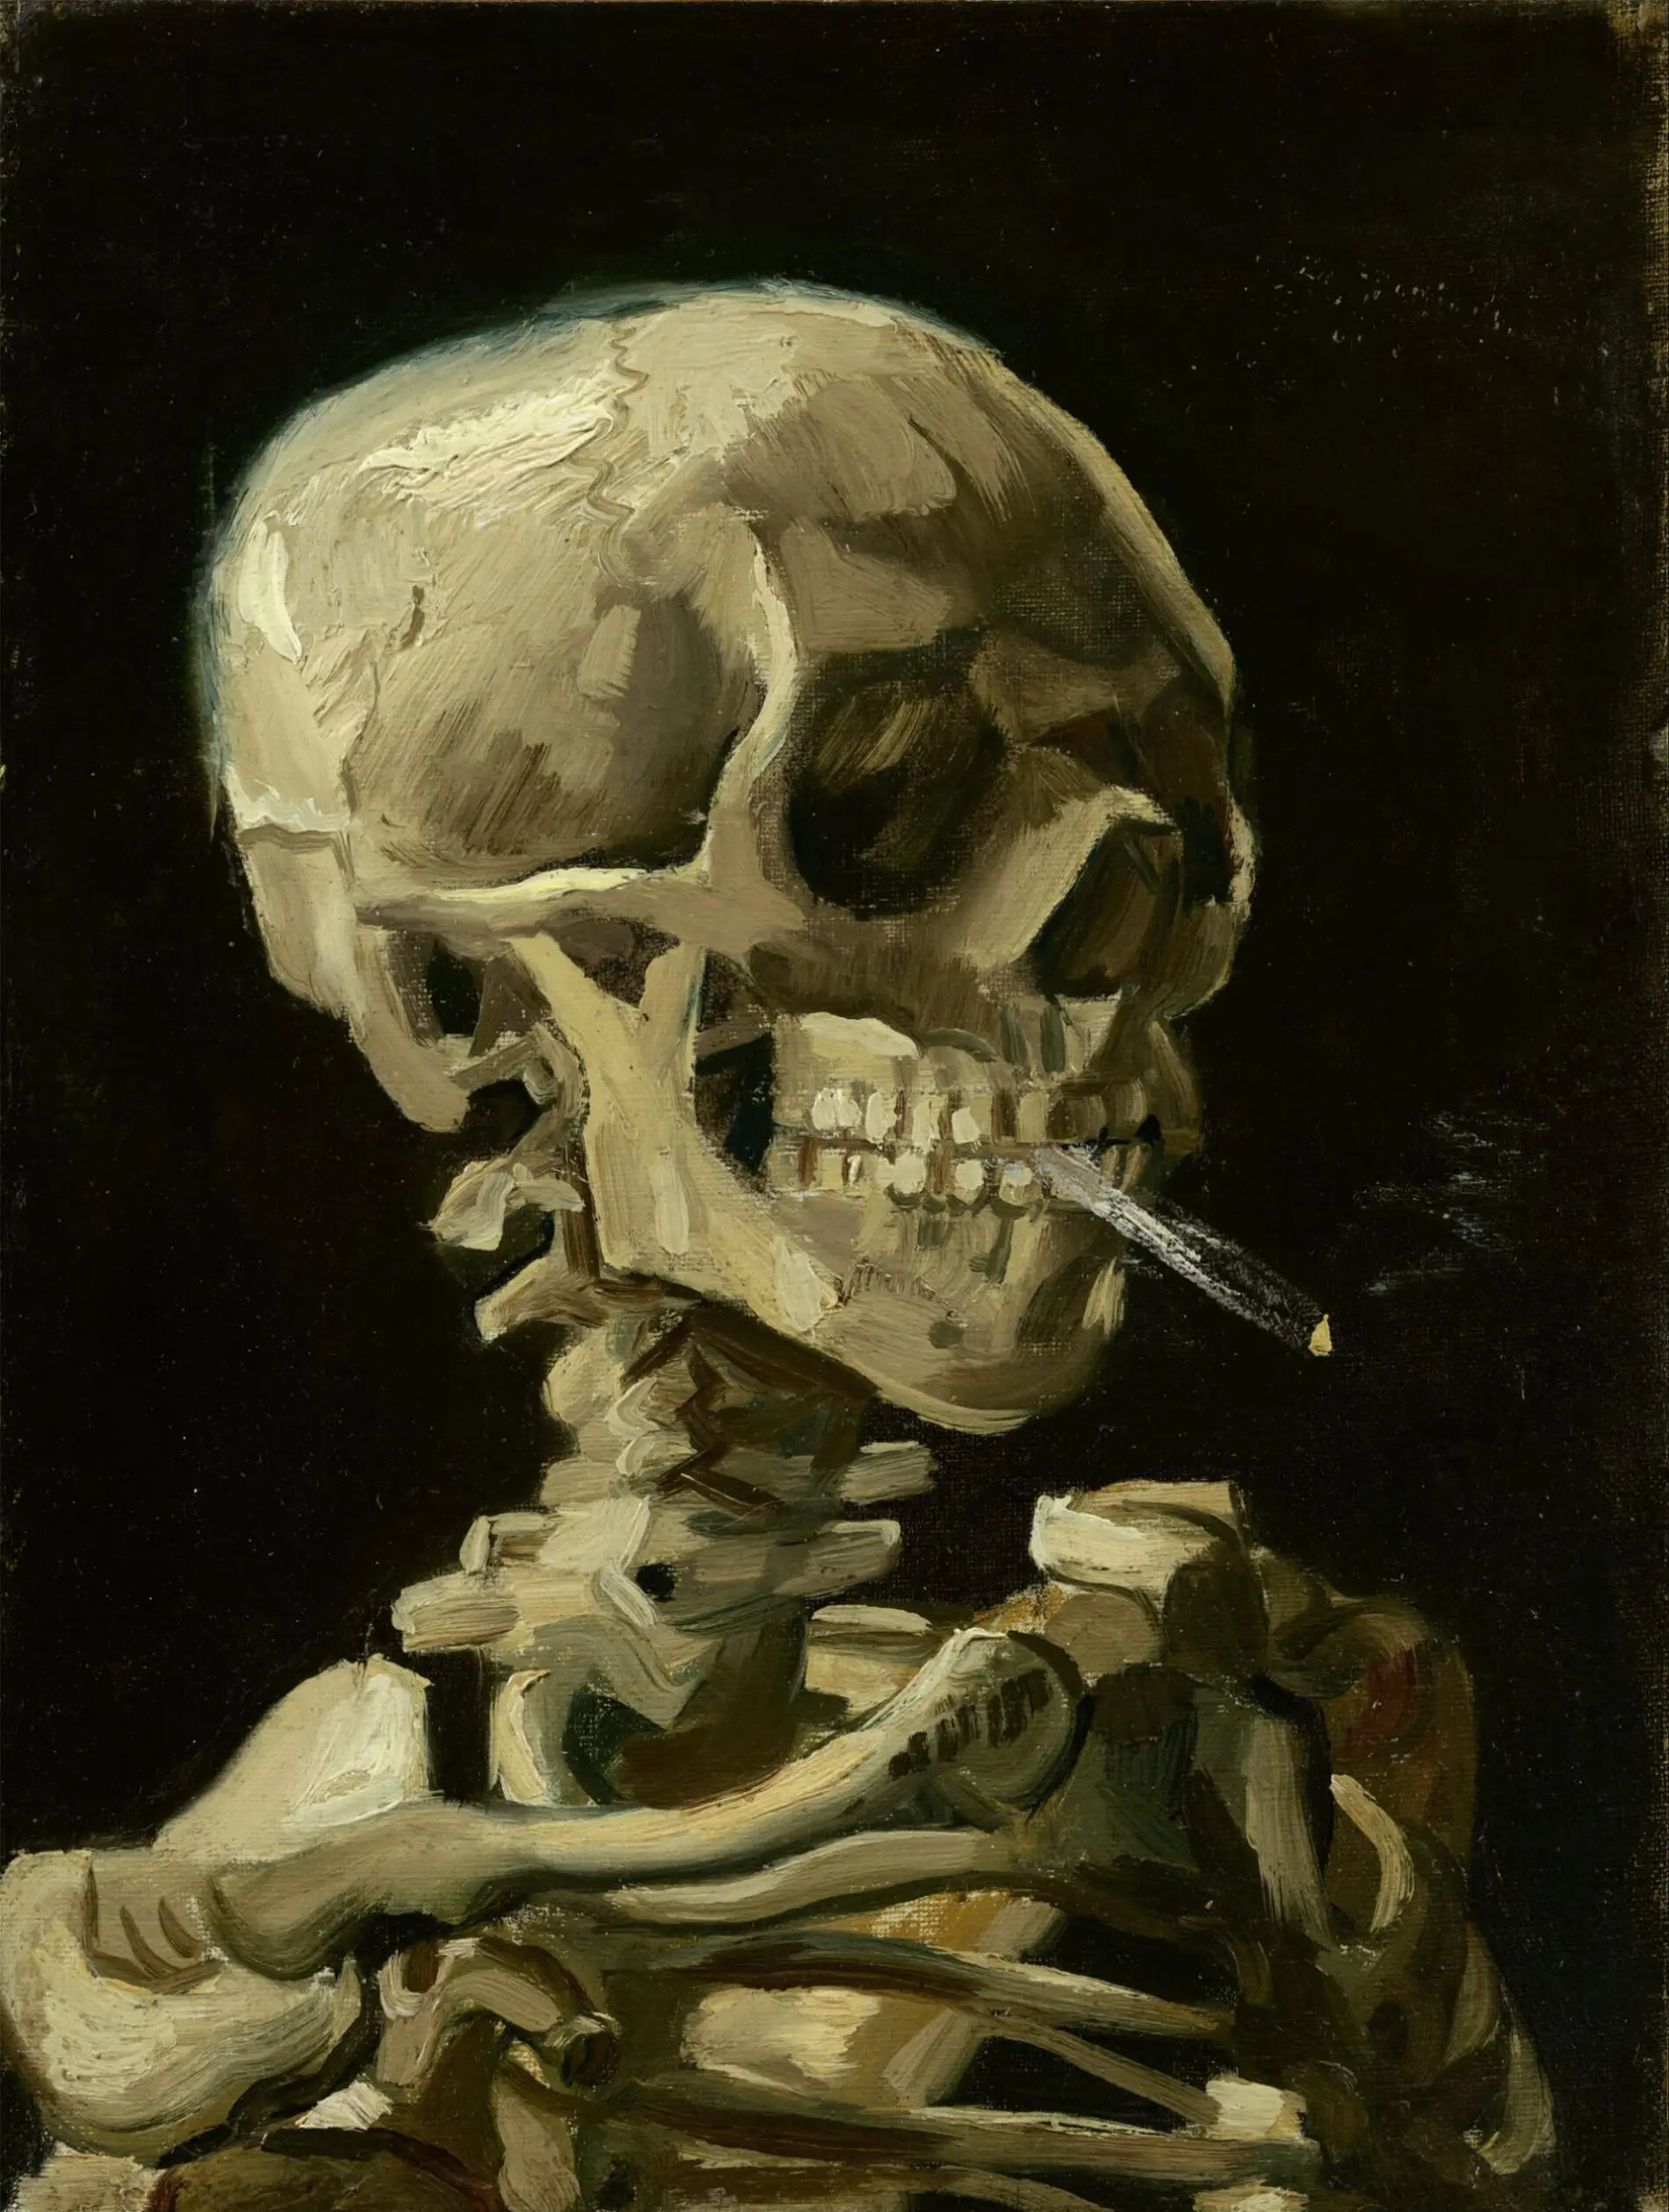 Head of a Skeleton with a Burning Cigarette van gogh